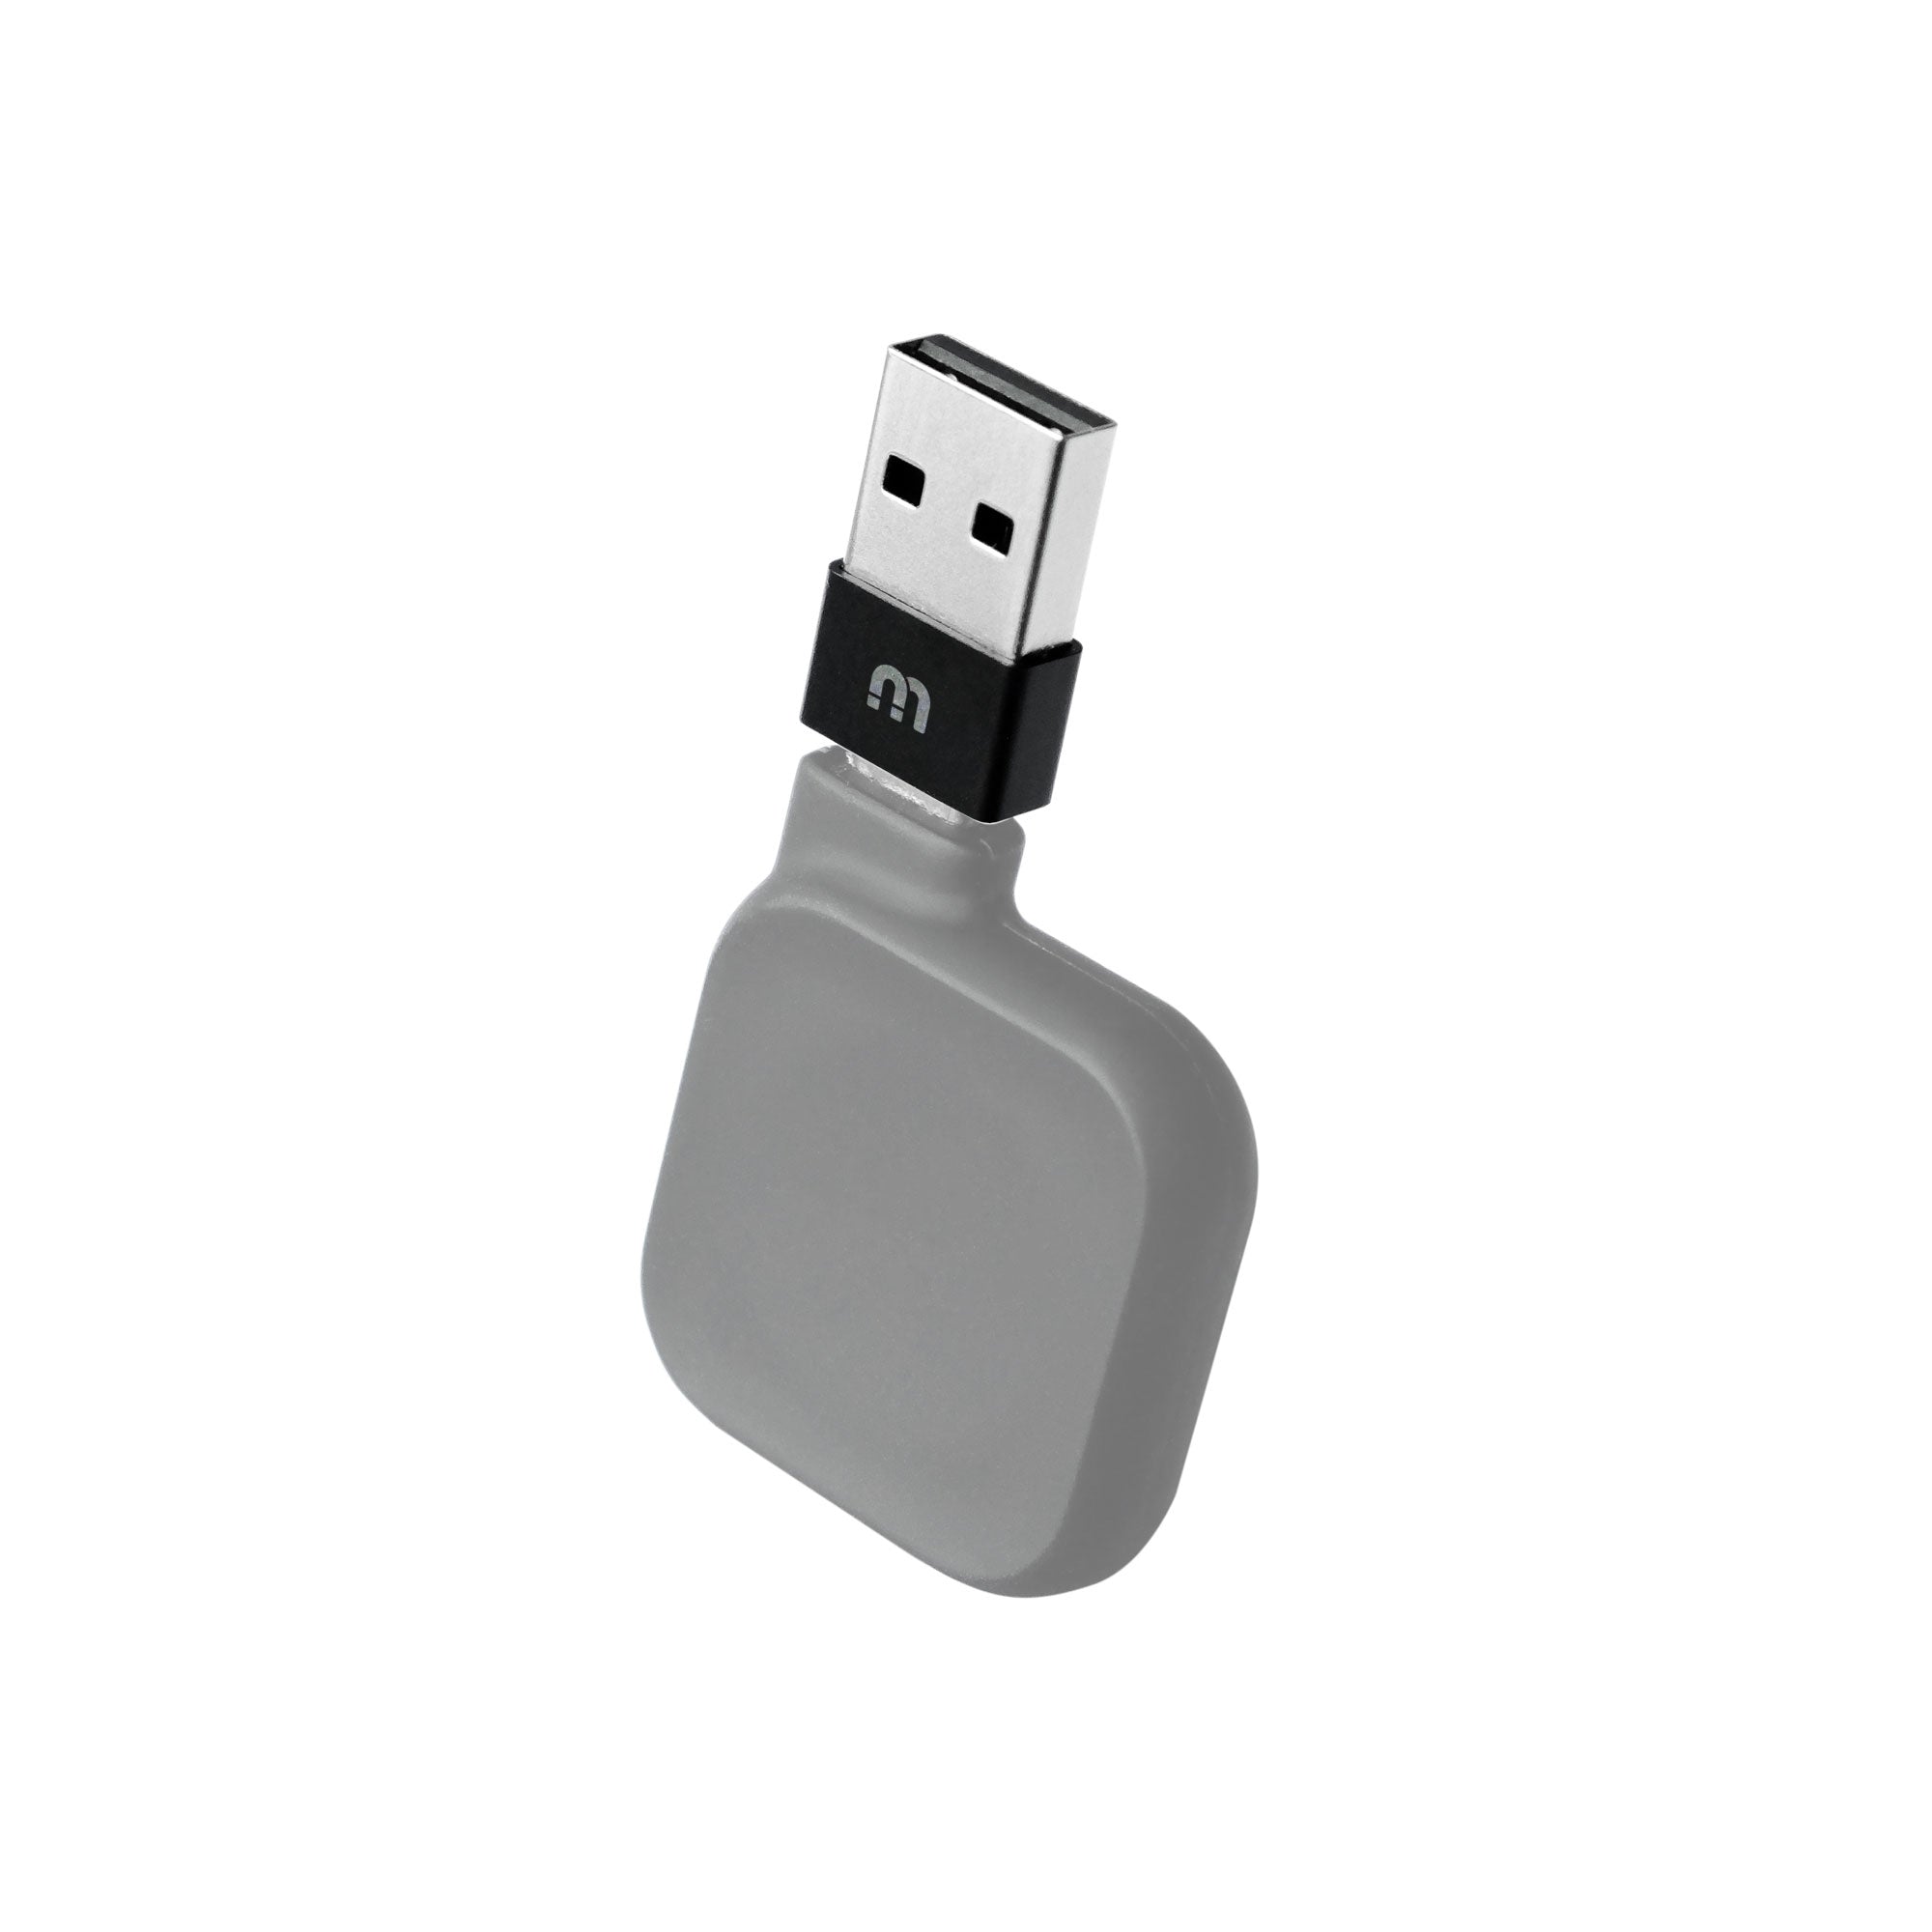 Maco USB A to C Adapter